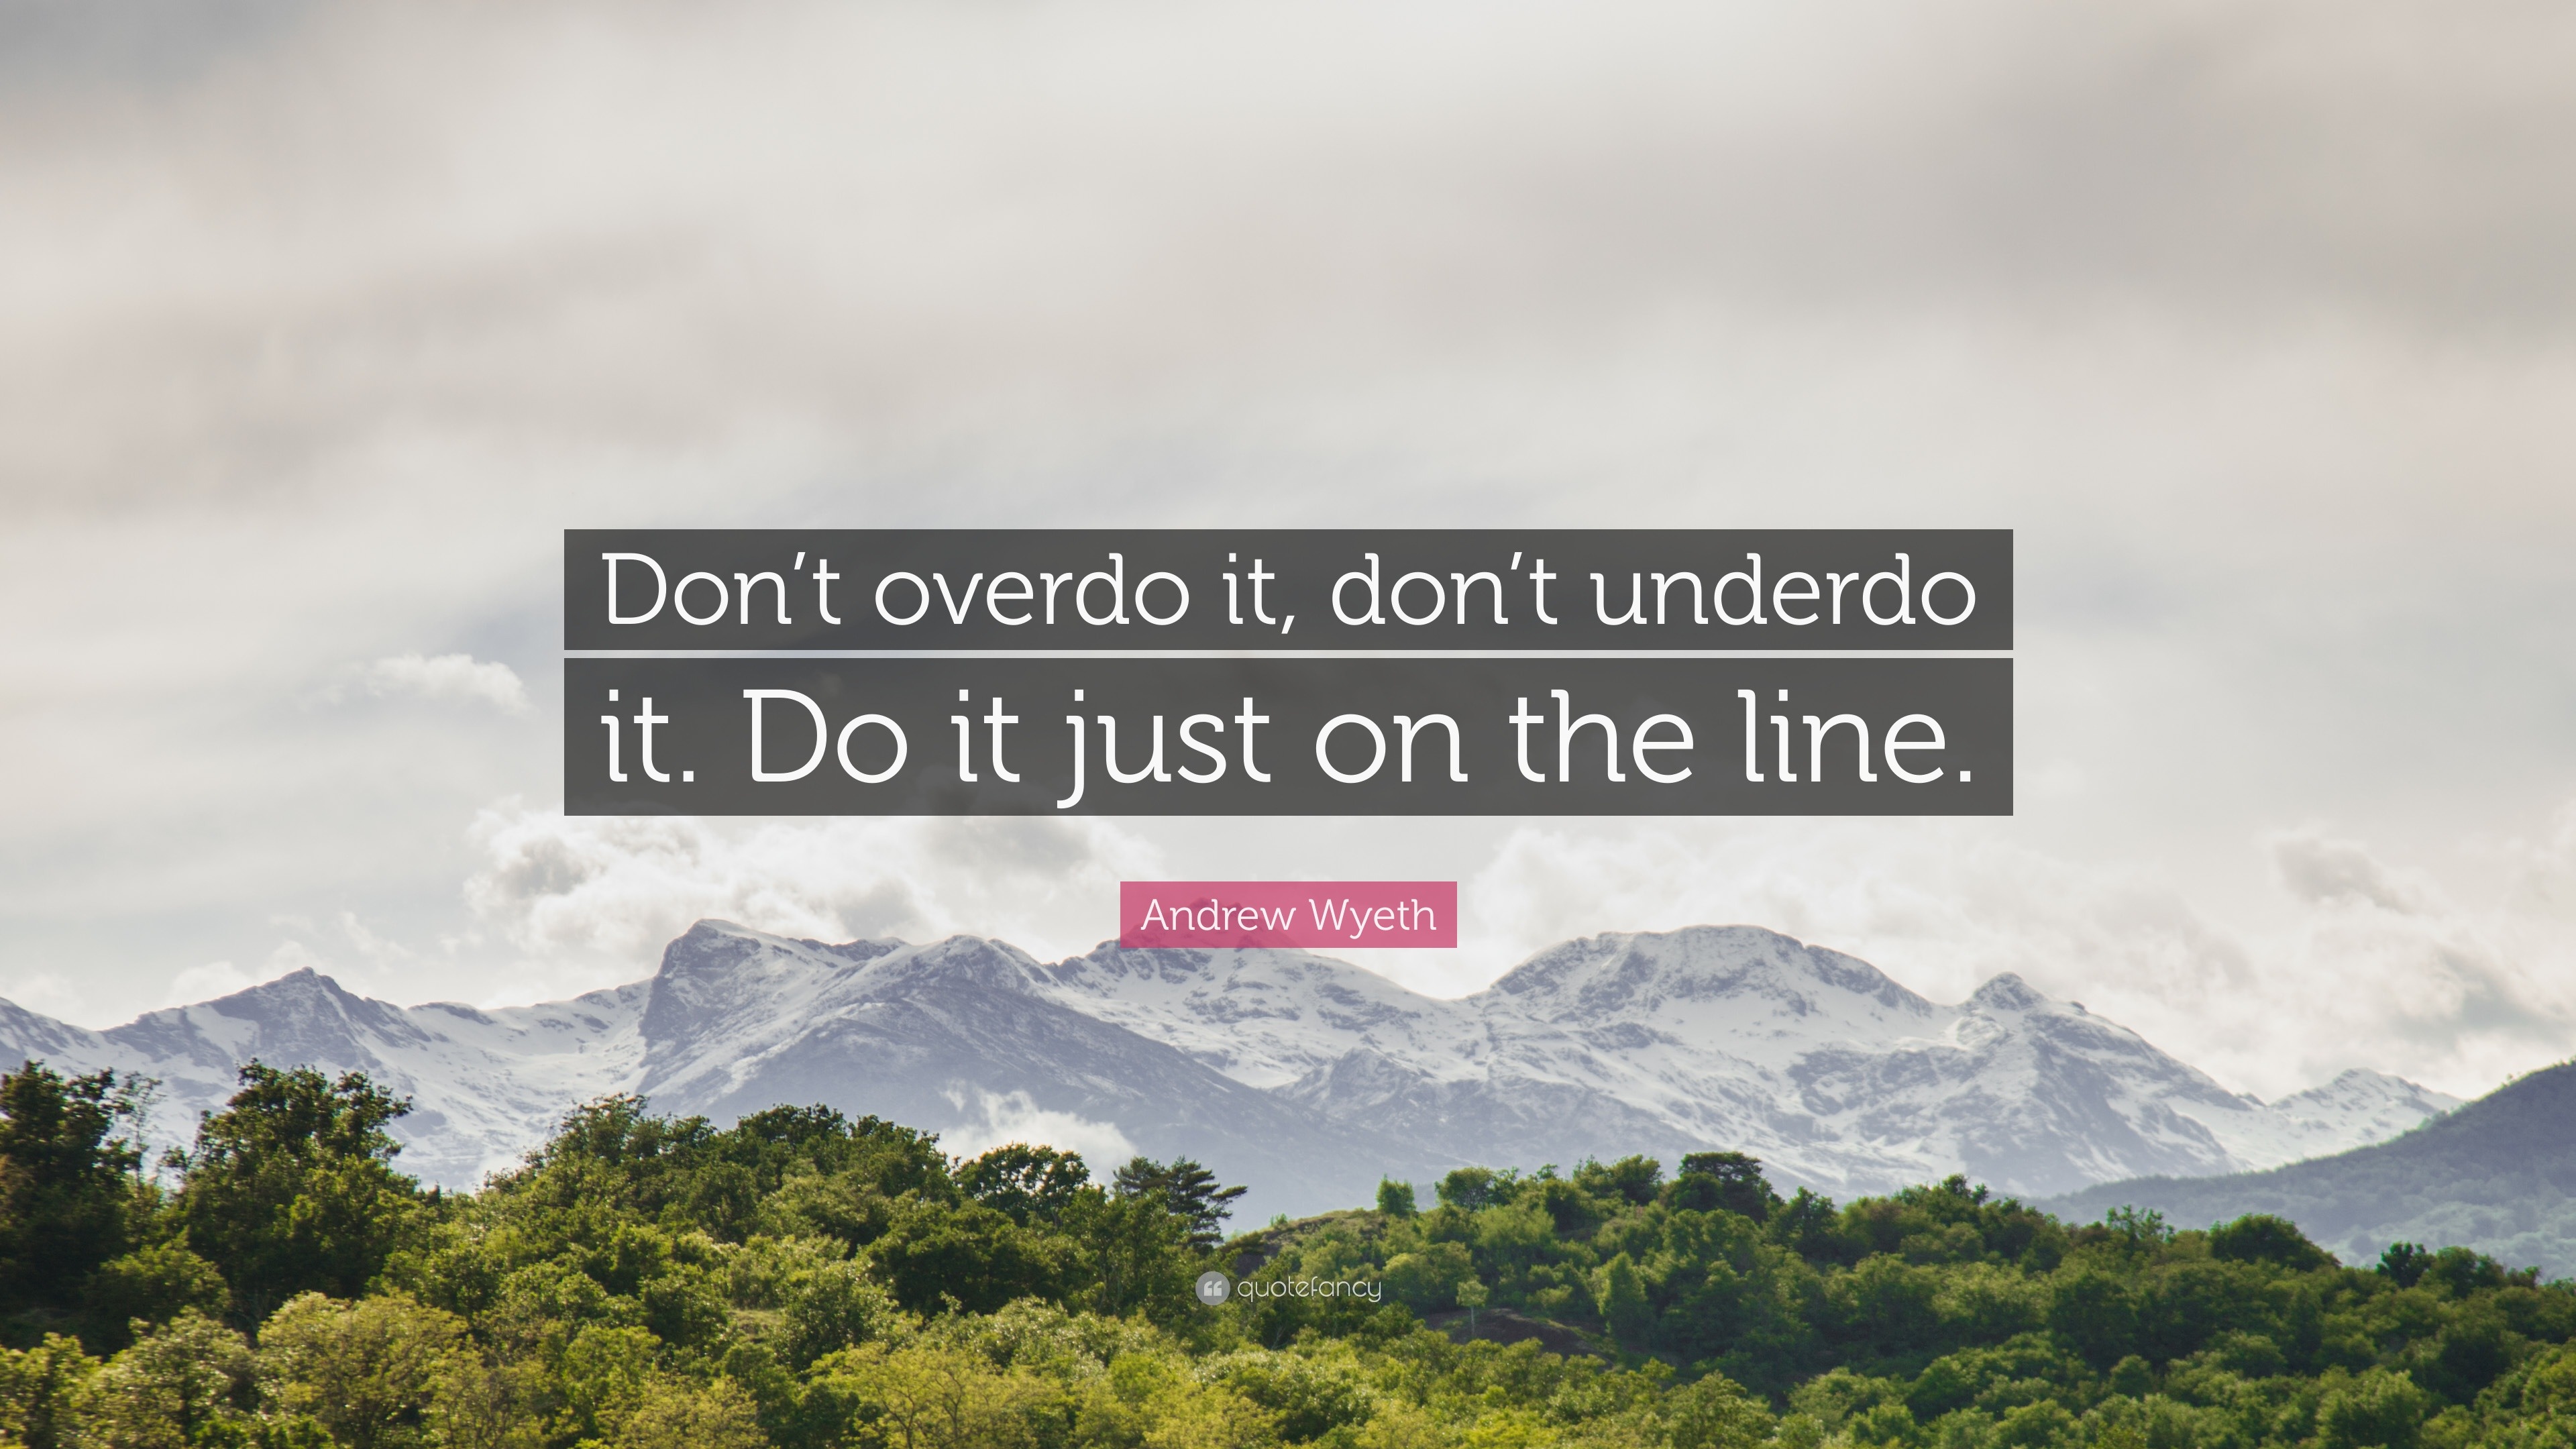 Andrew Wyeth Quote: “Don’t overdo it, don’t underdo it. Do it just on ...